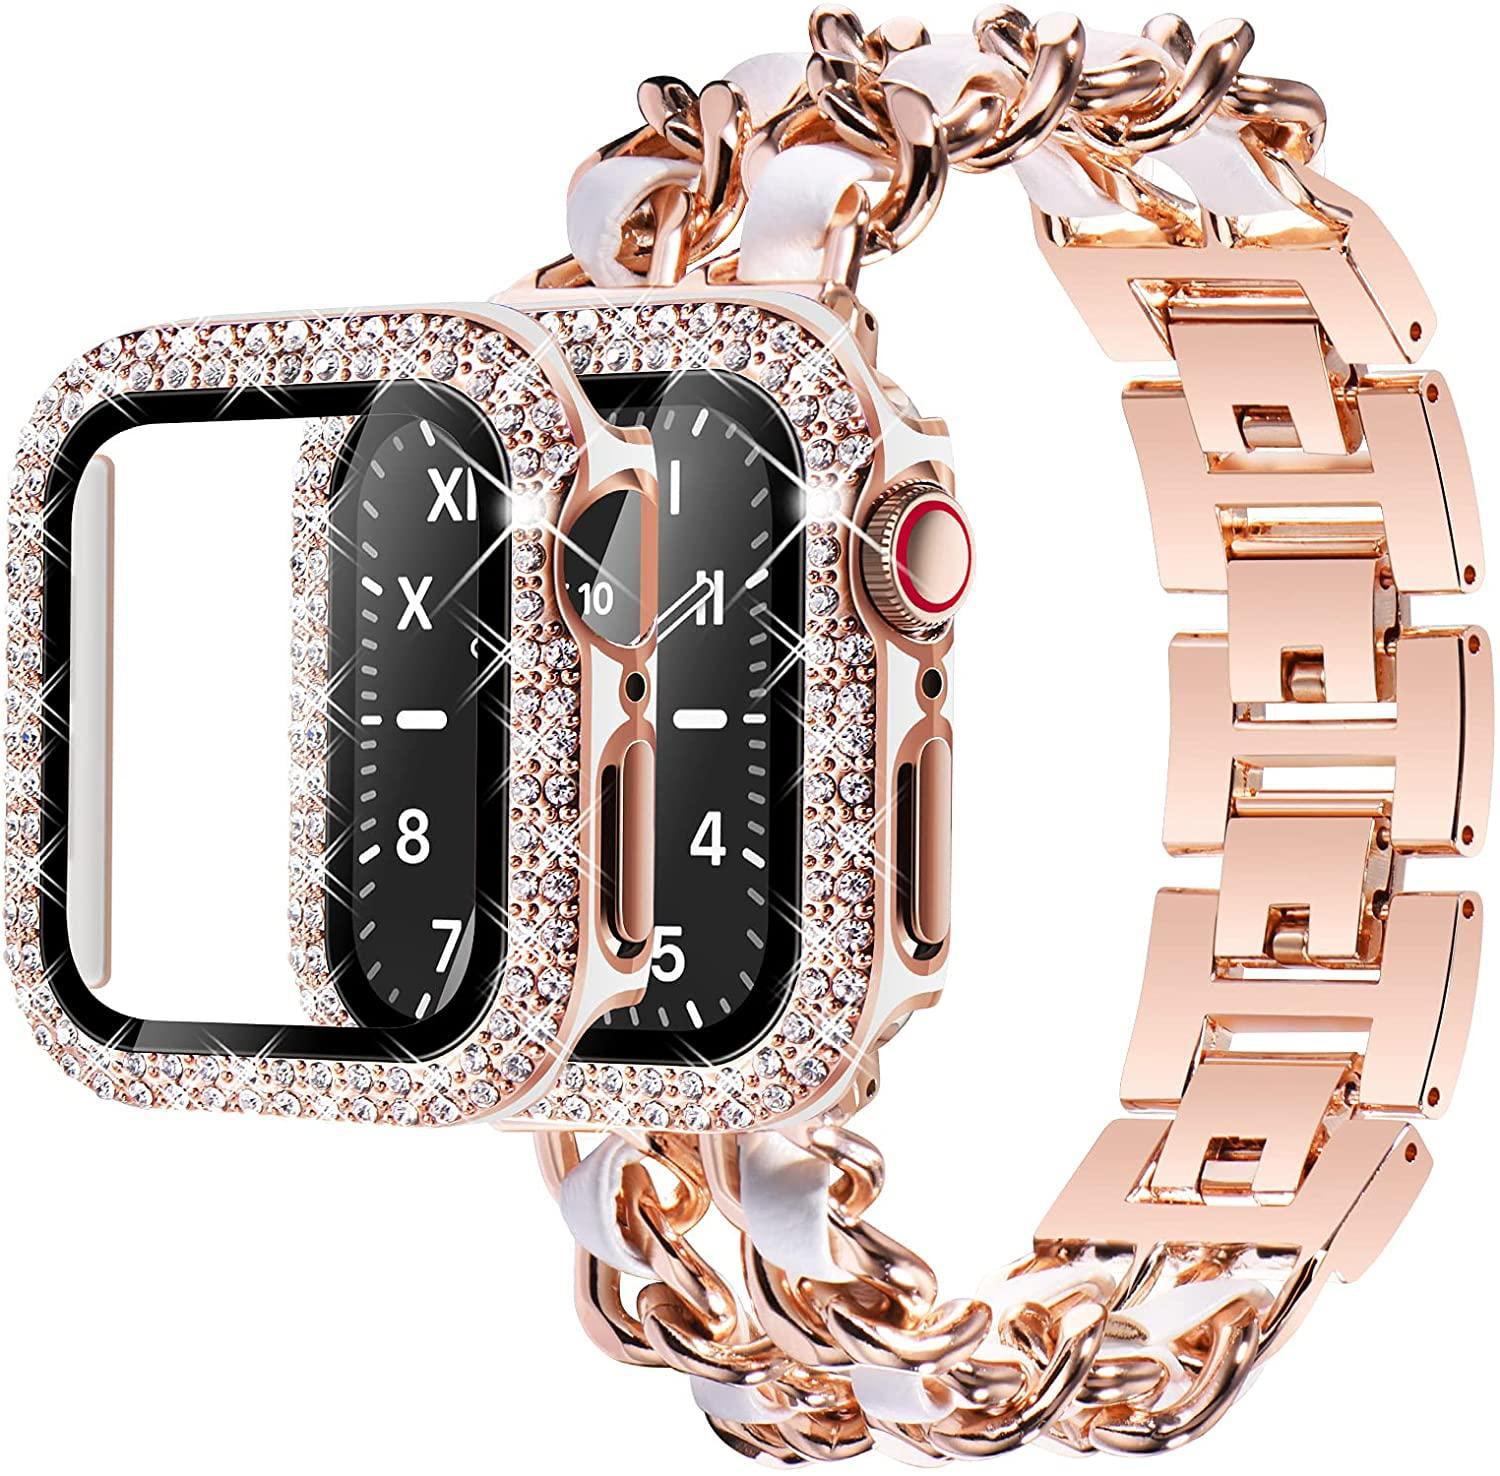 Apple 42mm Cover Case Metal Chain Watch Stainless Bumper Band with 41mm iWatch Interwoven Metal 8 YuiYuKa 45mm for 44mm and Bling Series Link Hard Steel 38mm 7 40mm Leather Strap for